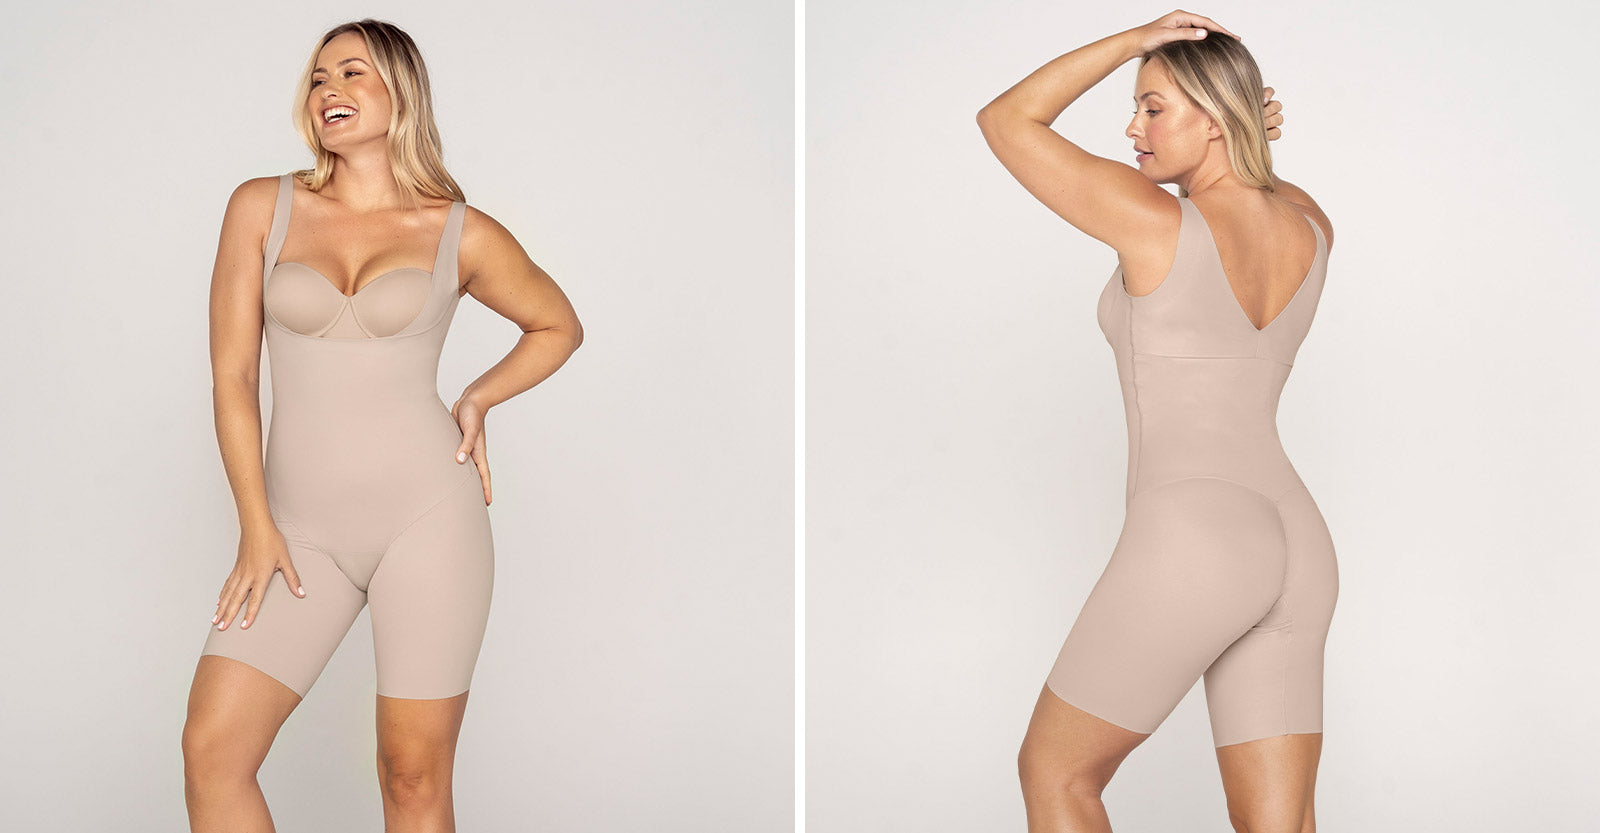 SHAPEWEAR HAUL, REDUCE BACK ROLLS, LOVE HANDLES AND BELLY FAT IN SECONDS